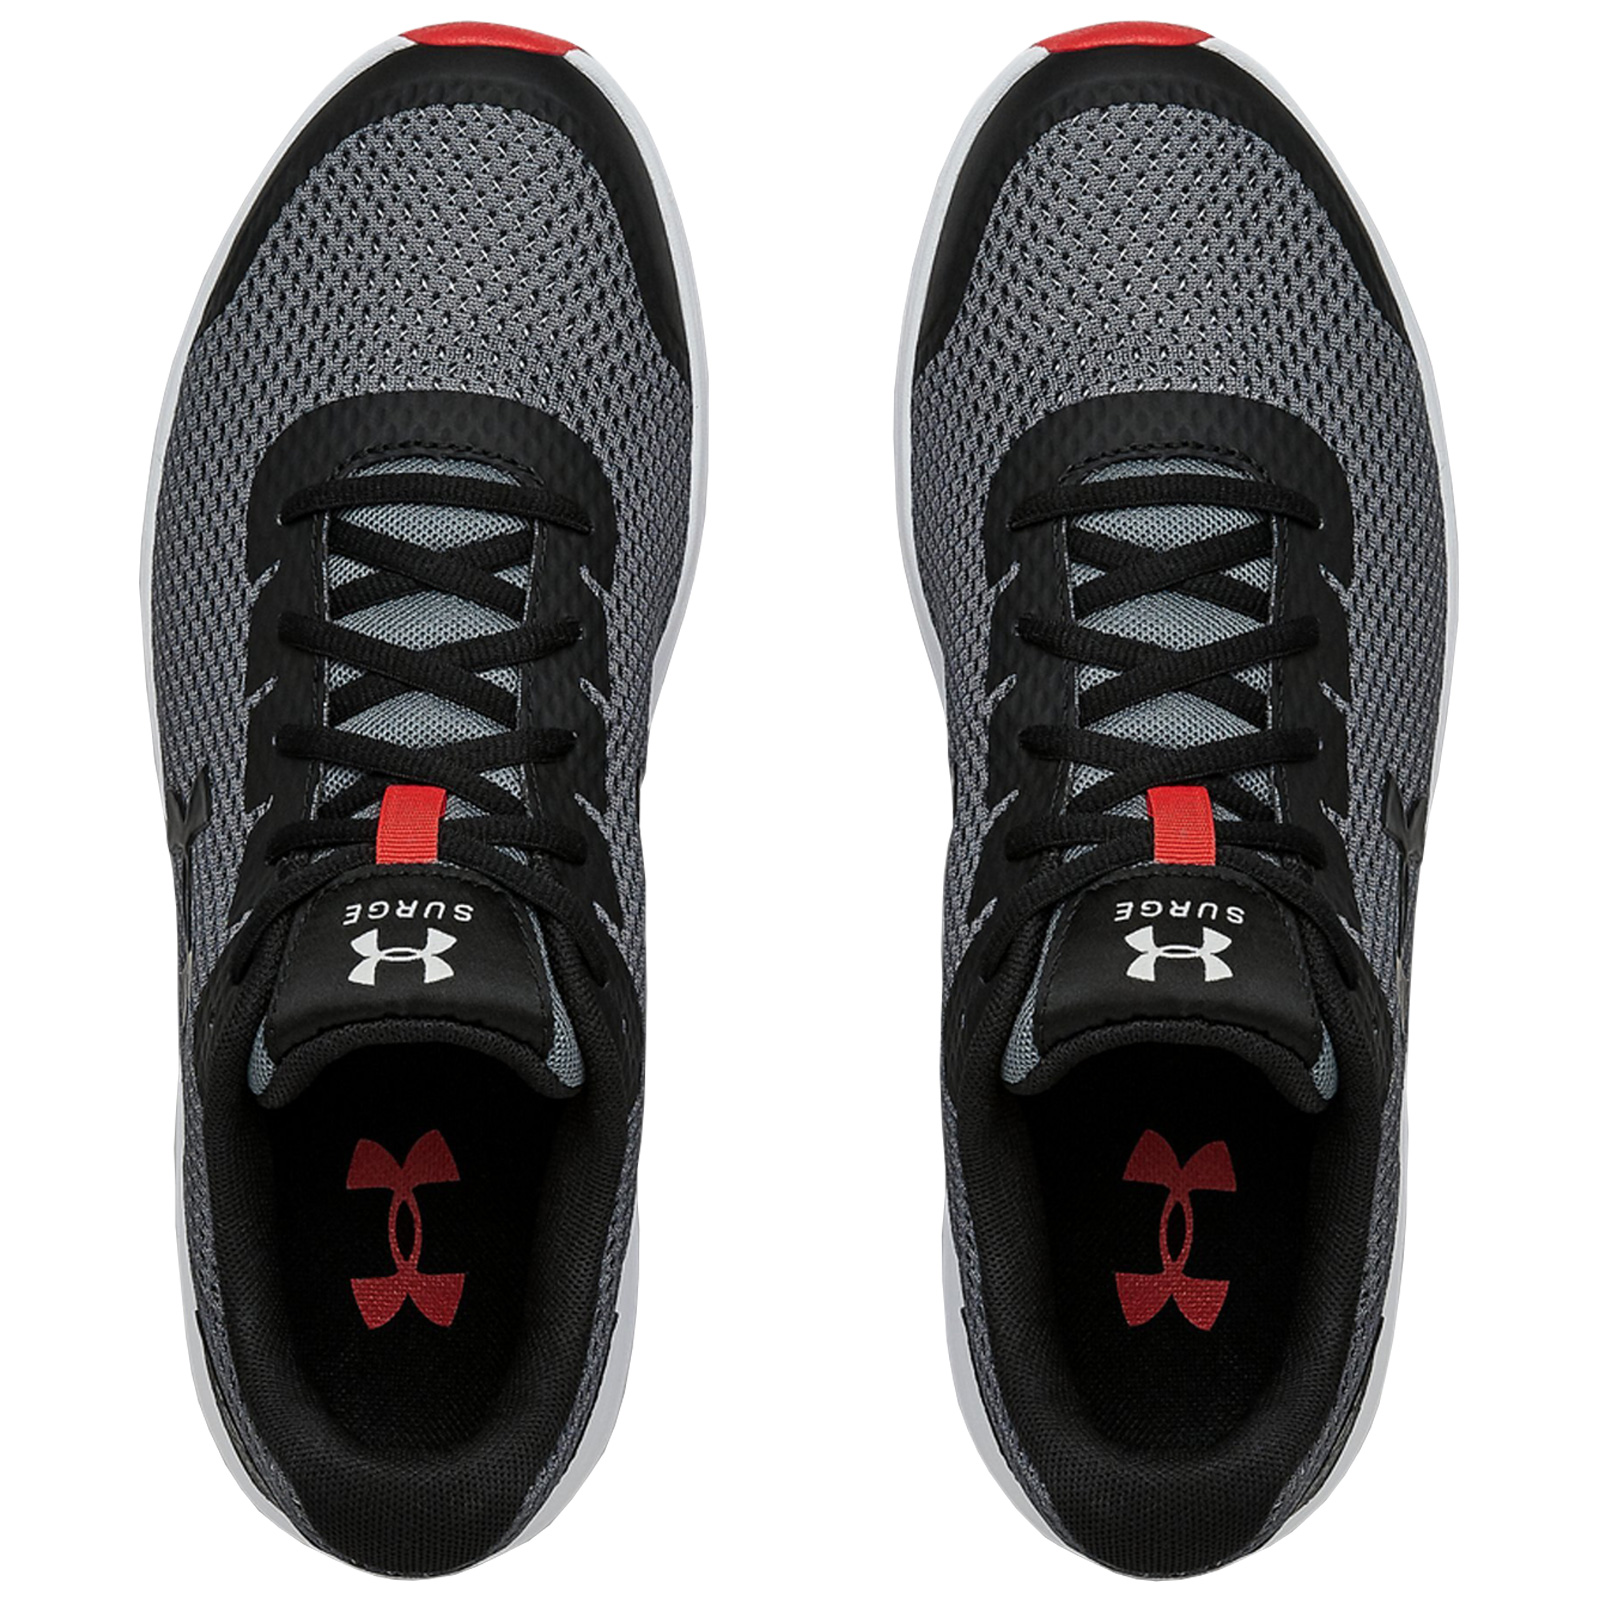 2020 Under Armour Mens Surge 2 Trainers UA Gym Running Shoes Walking ...